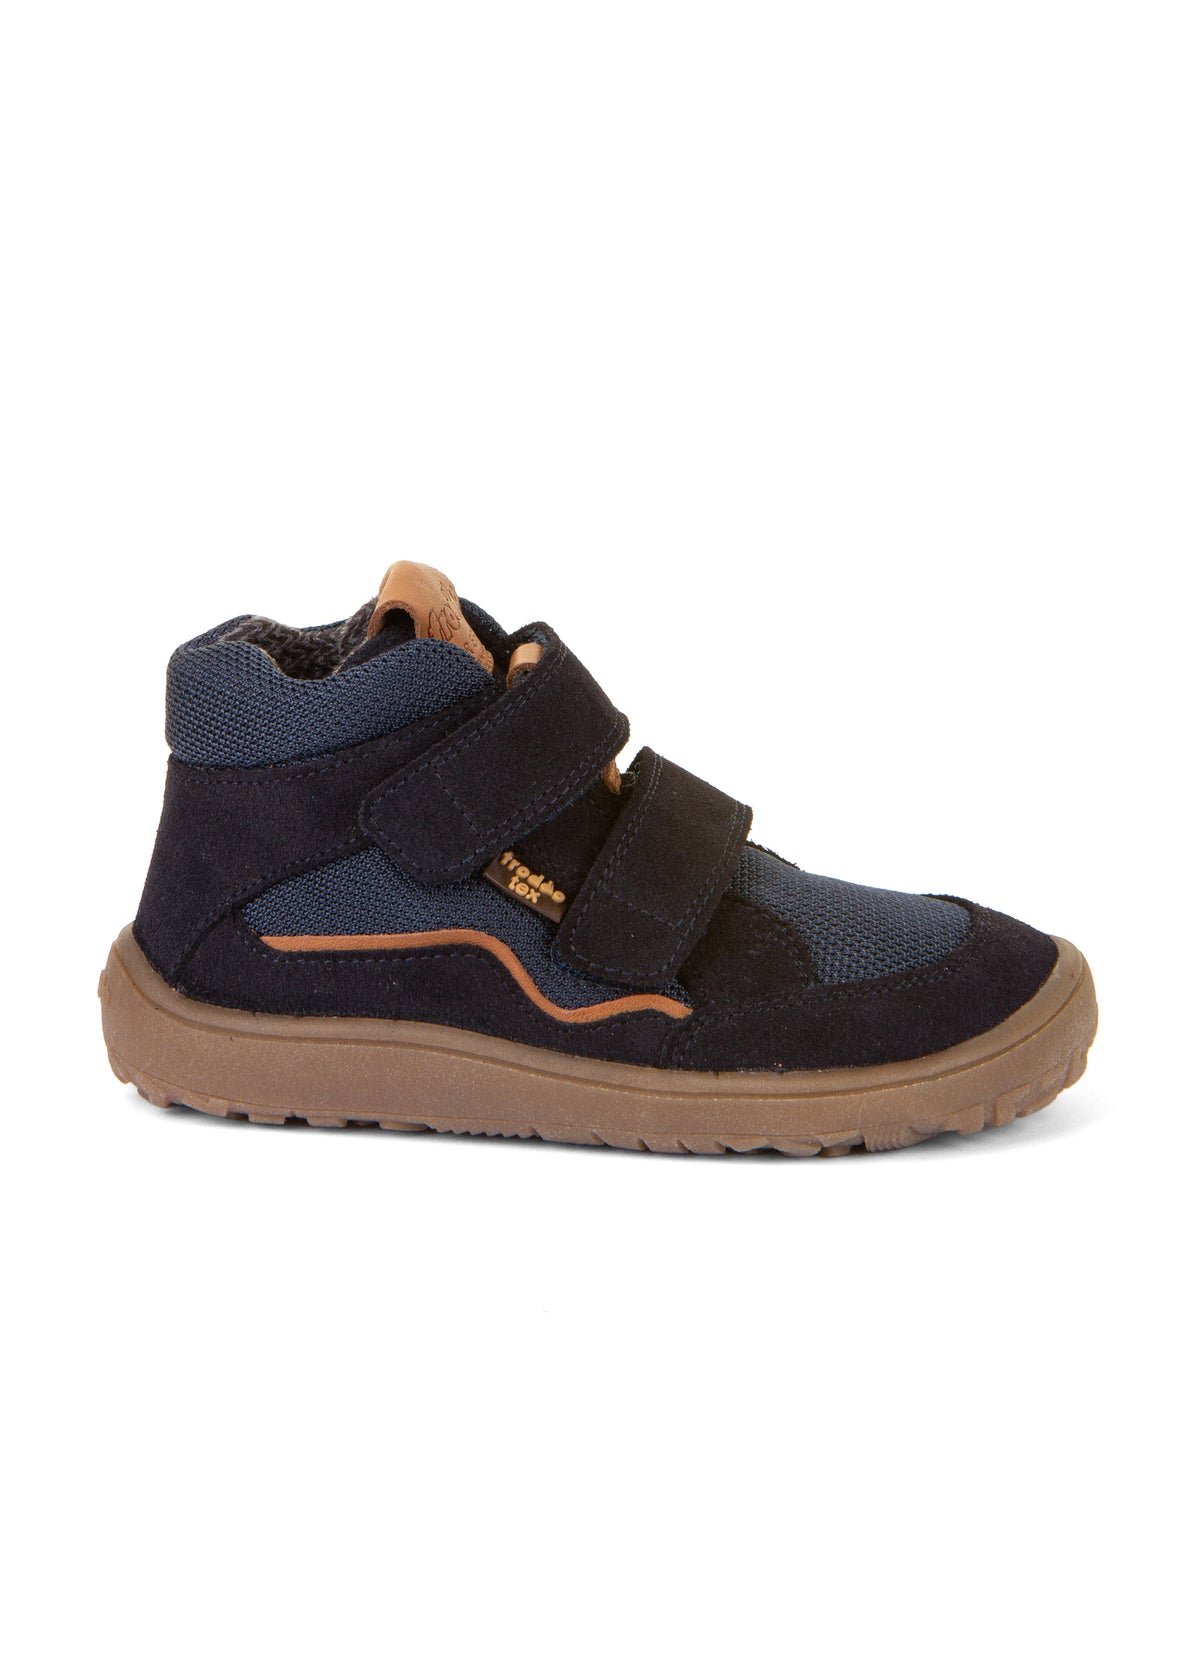 Barefoot sneakers with handles - mid-season shoes, Autumn-TEX, dark blue